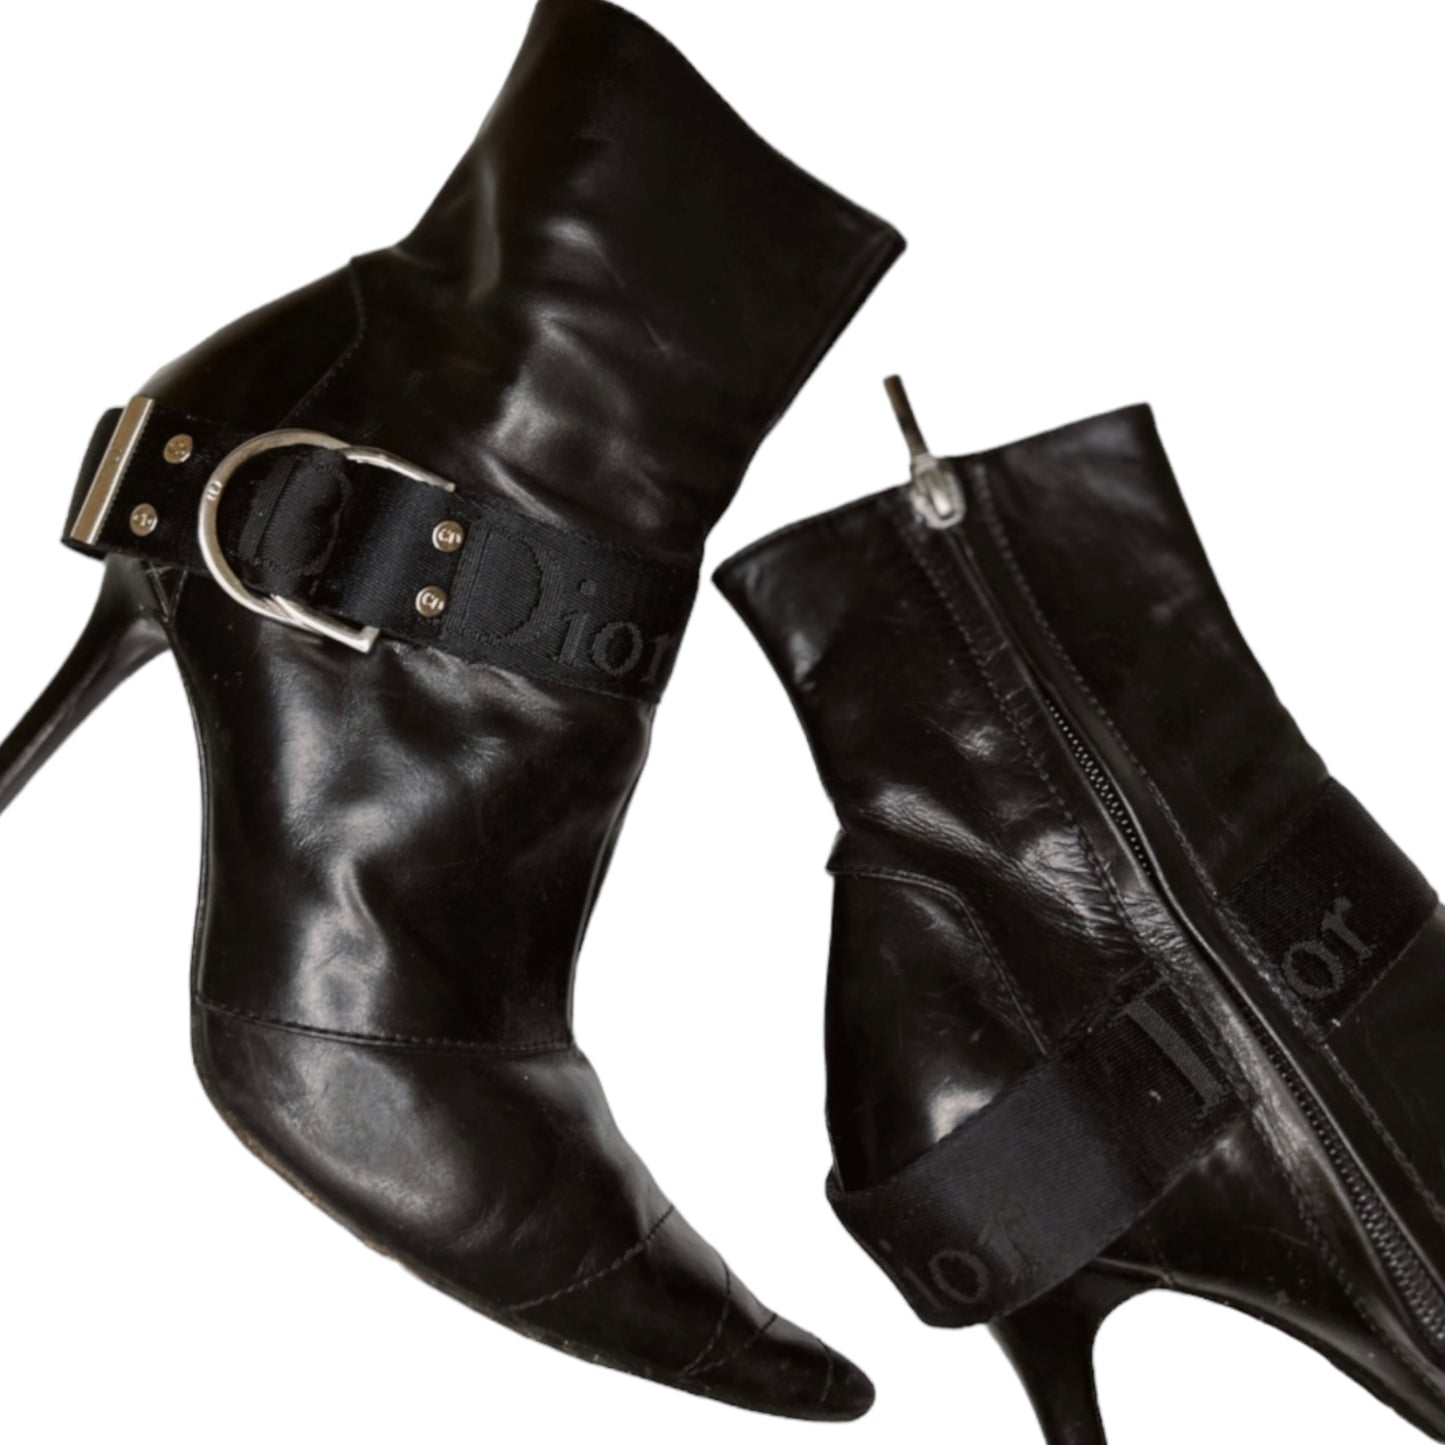 Vintage Dior 2003 leather boots